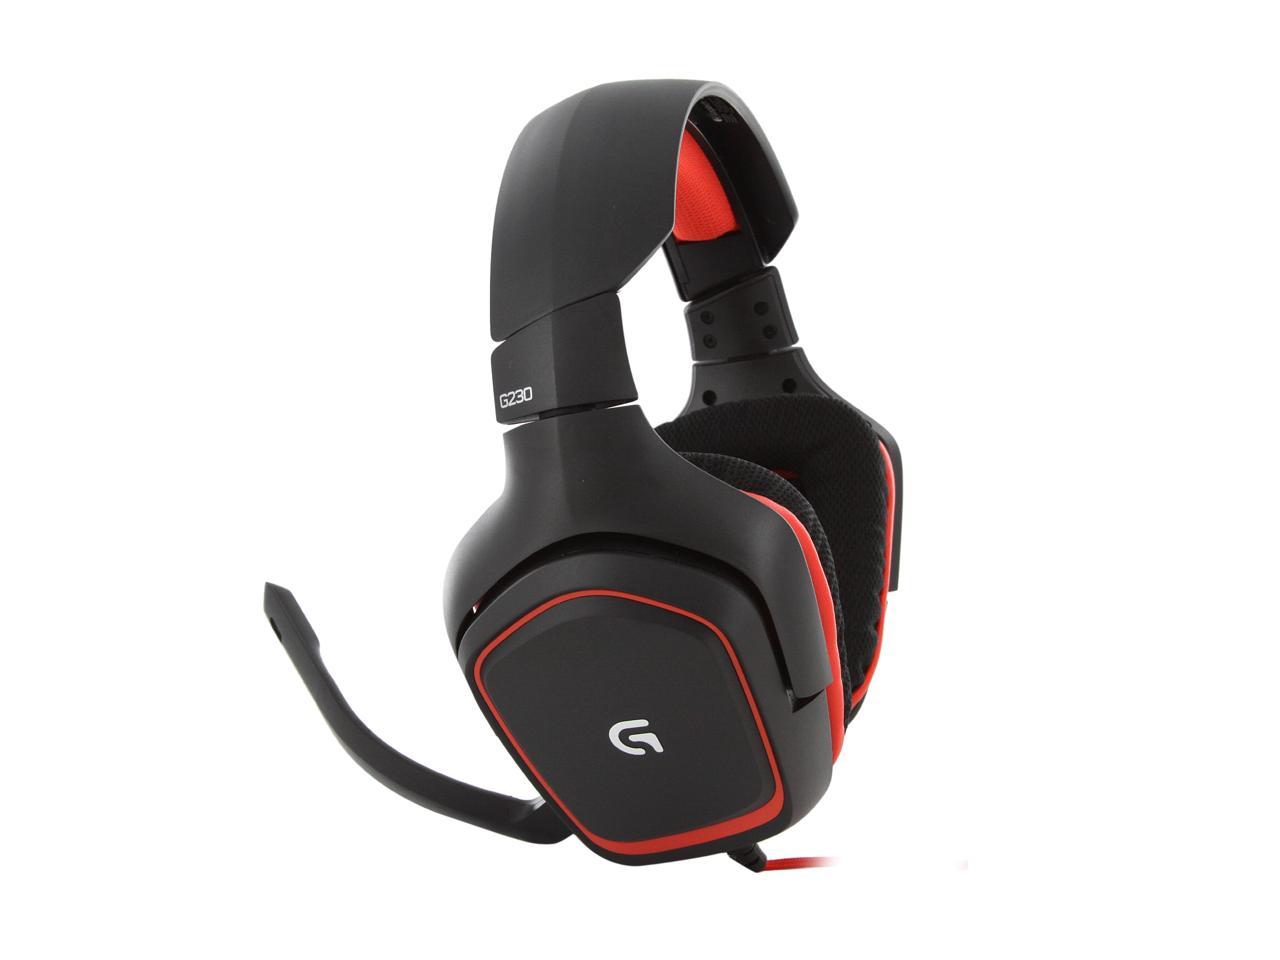 Logitech G230 Stereo Gaming Headset with Mic 